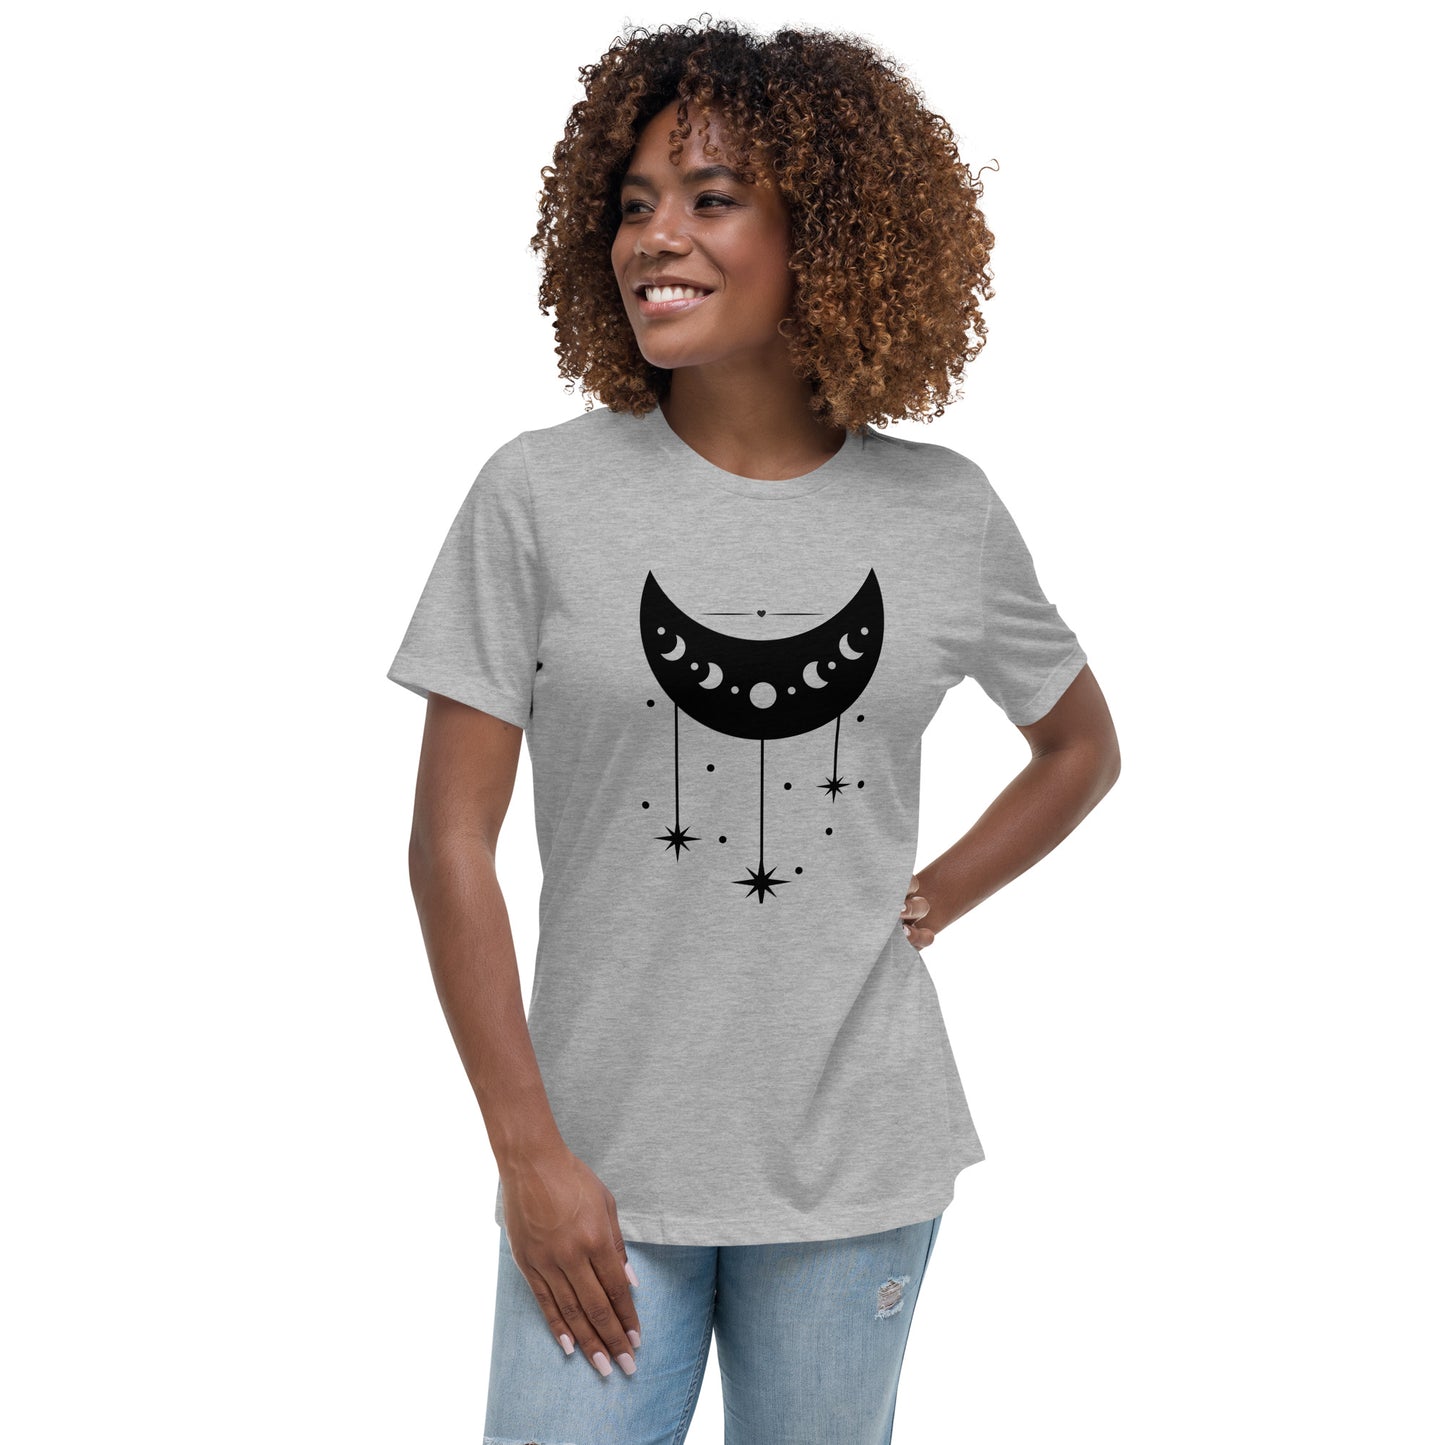 Moon Phase Women's Relaxed Fit T-Shirt